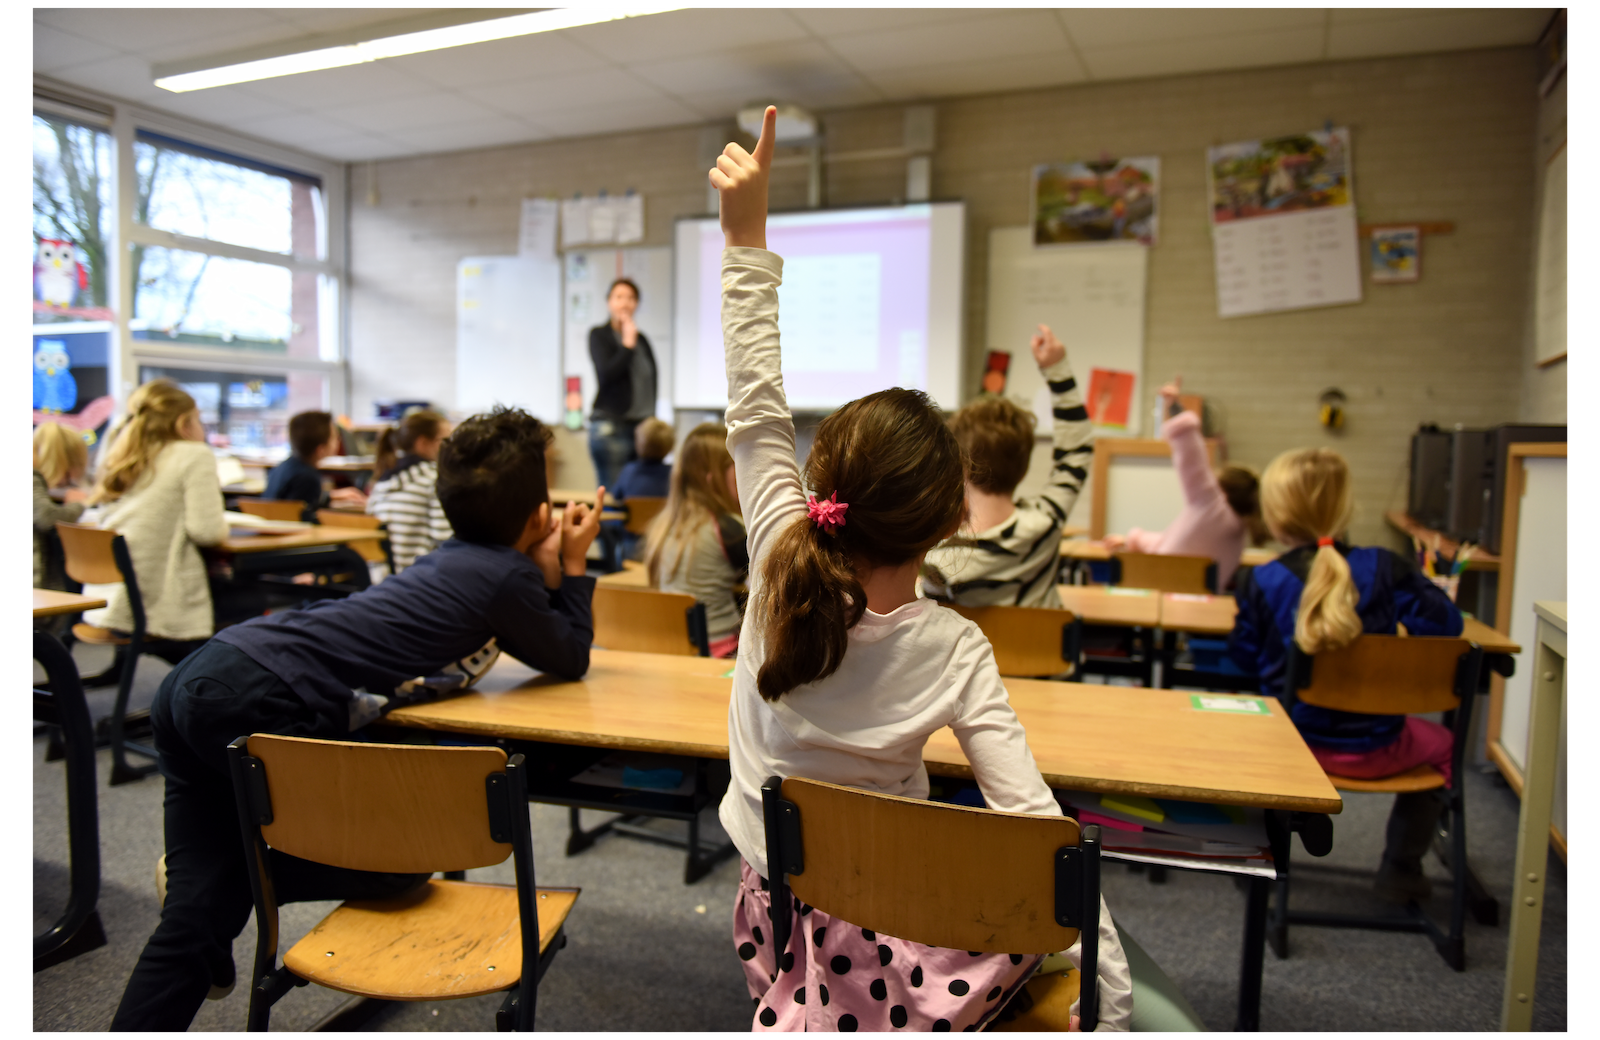 A girl in the back of a classroom raises her hand